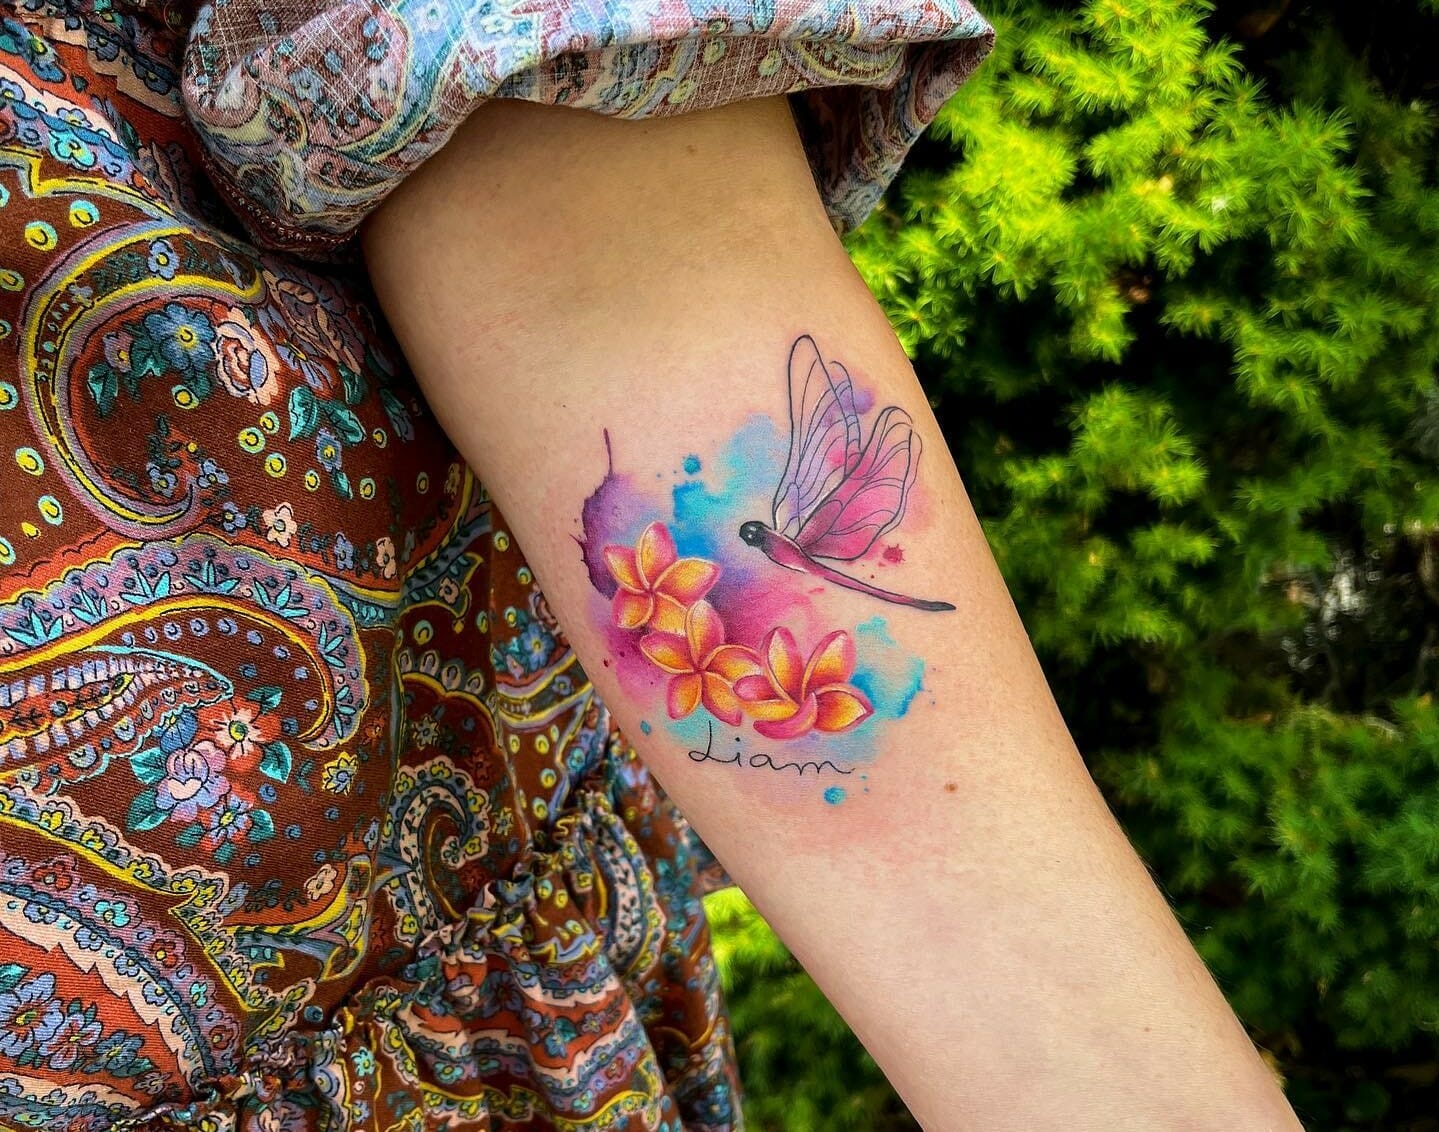 Tattoo uploaded by Megan  Lotus flower dragonflies and decorative beads   Tattoodo